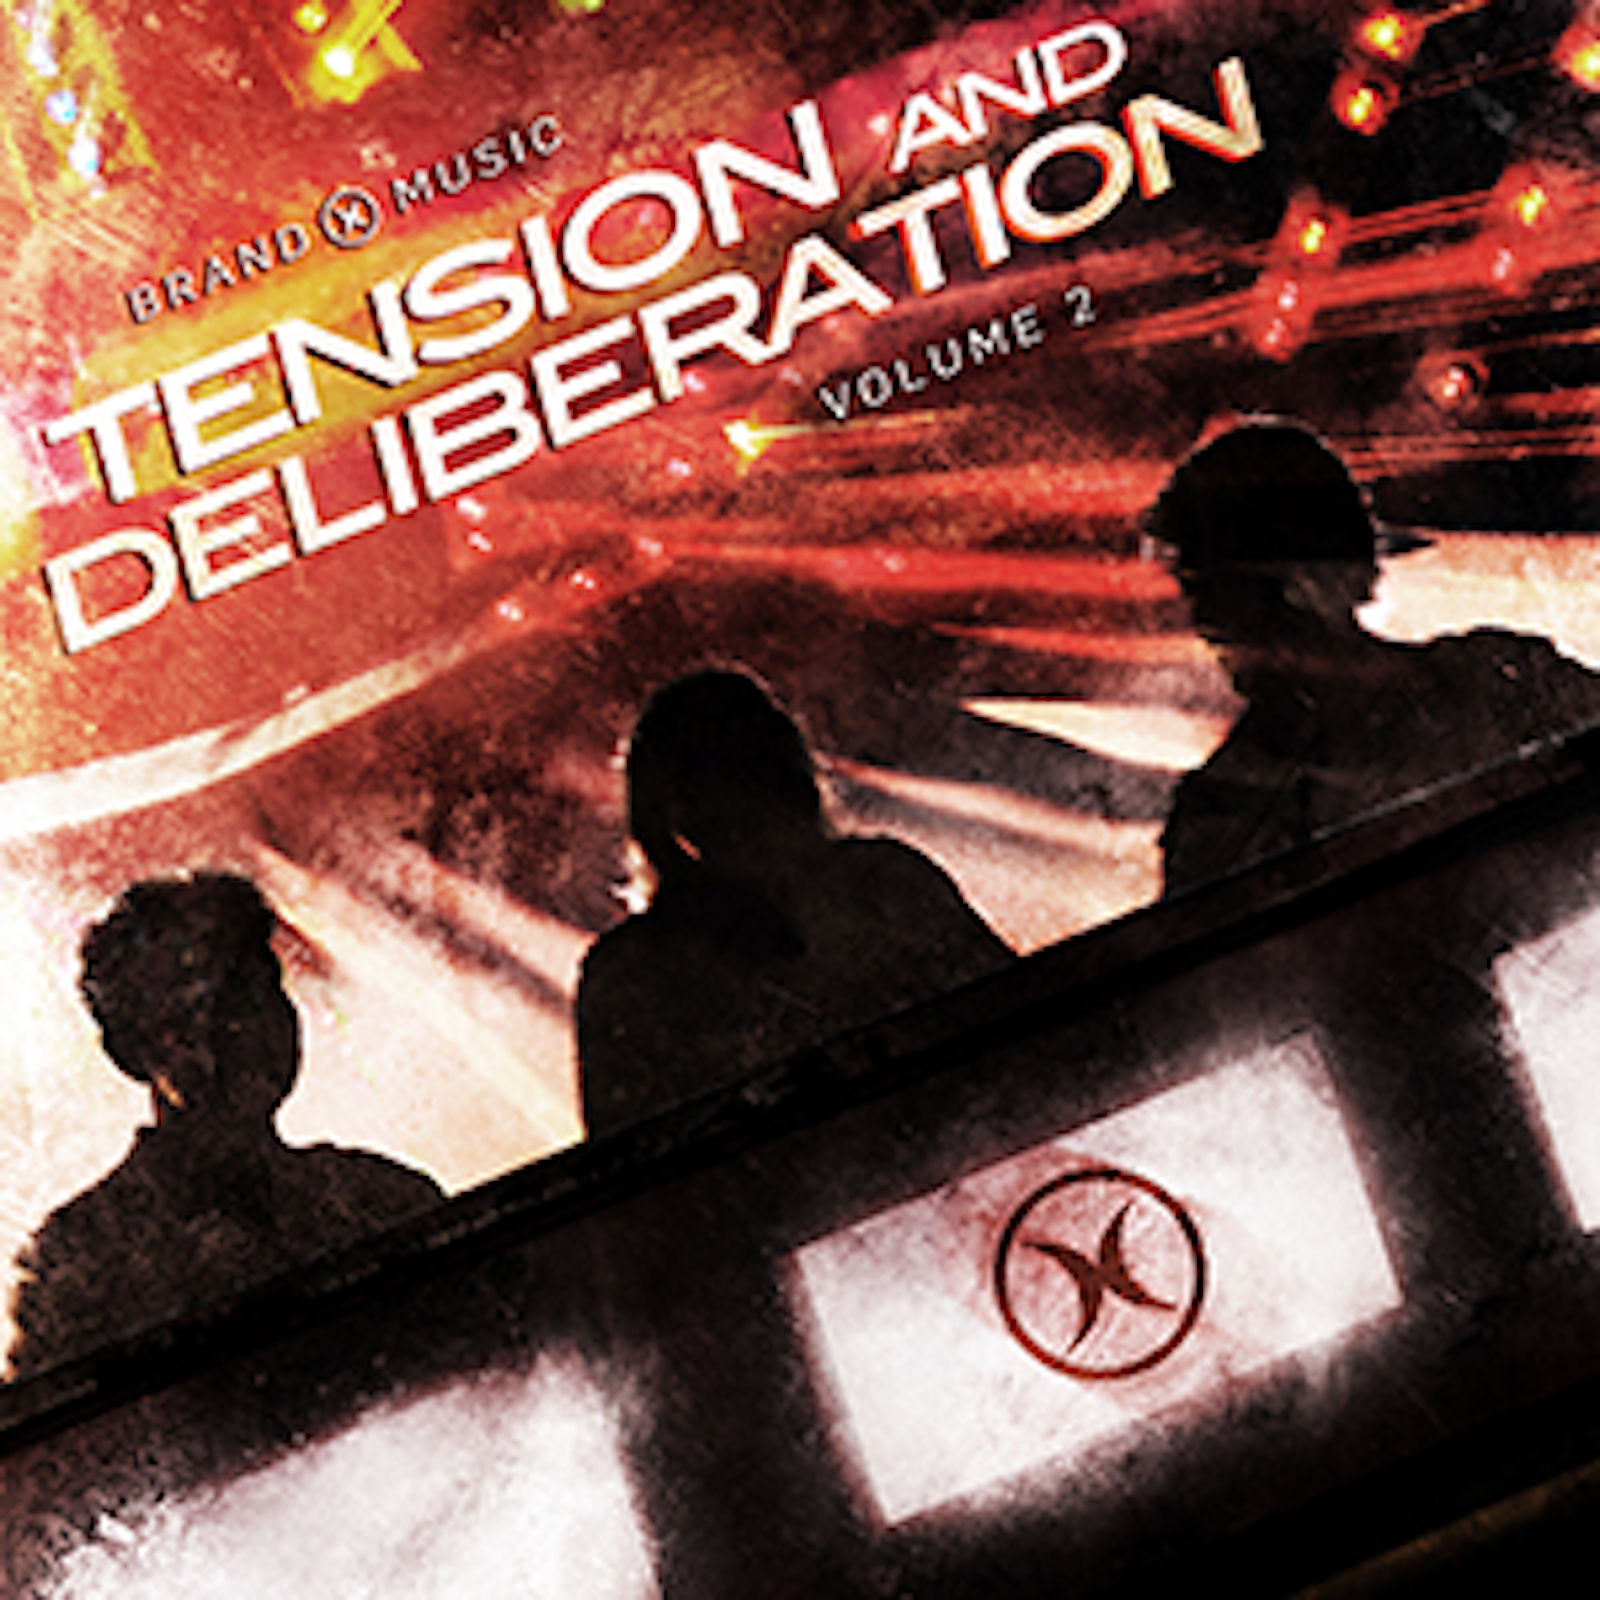 Tension and Deliberation Volume 2